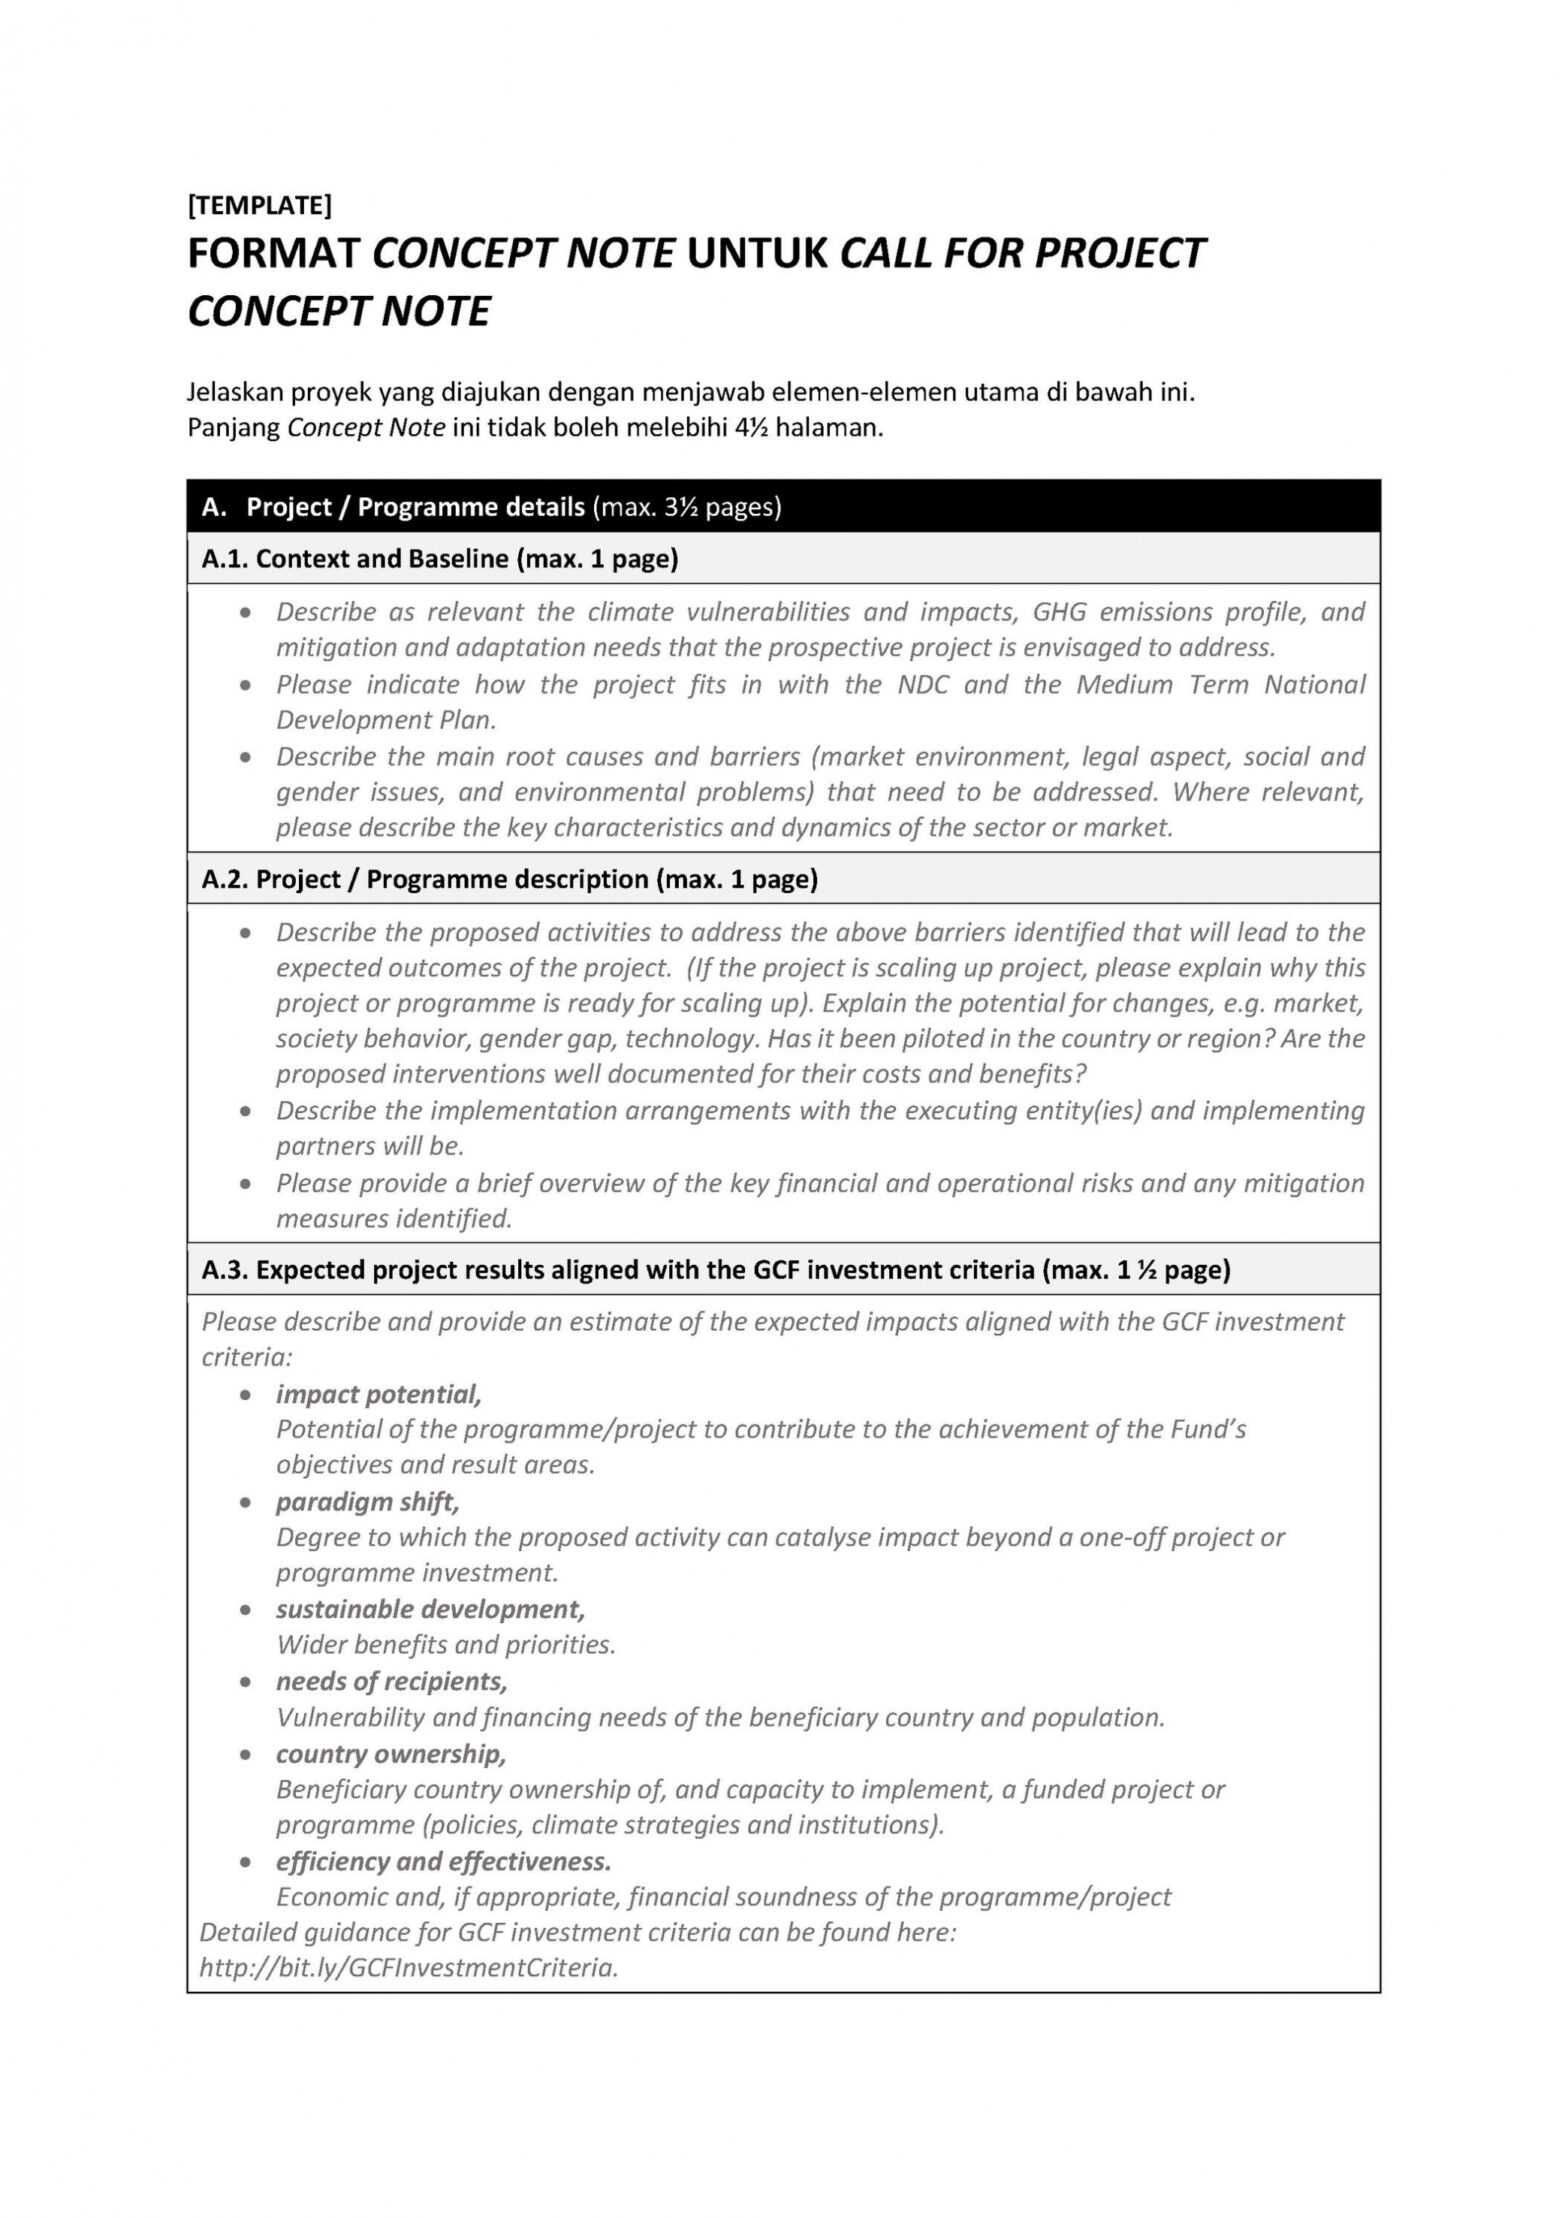 Nda Gcf - Concept Note Format For Call For Project Concept Note throughout Concept Note Template For Project